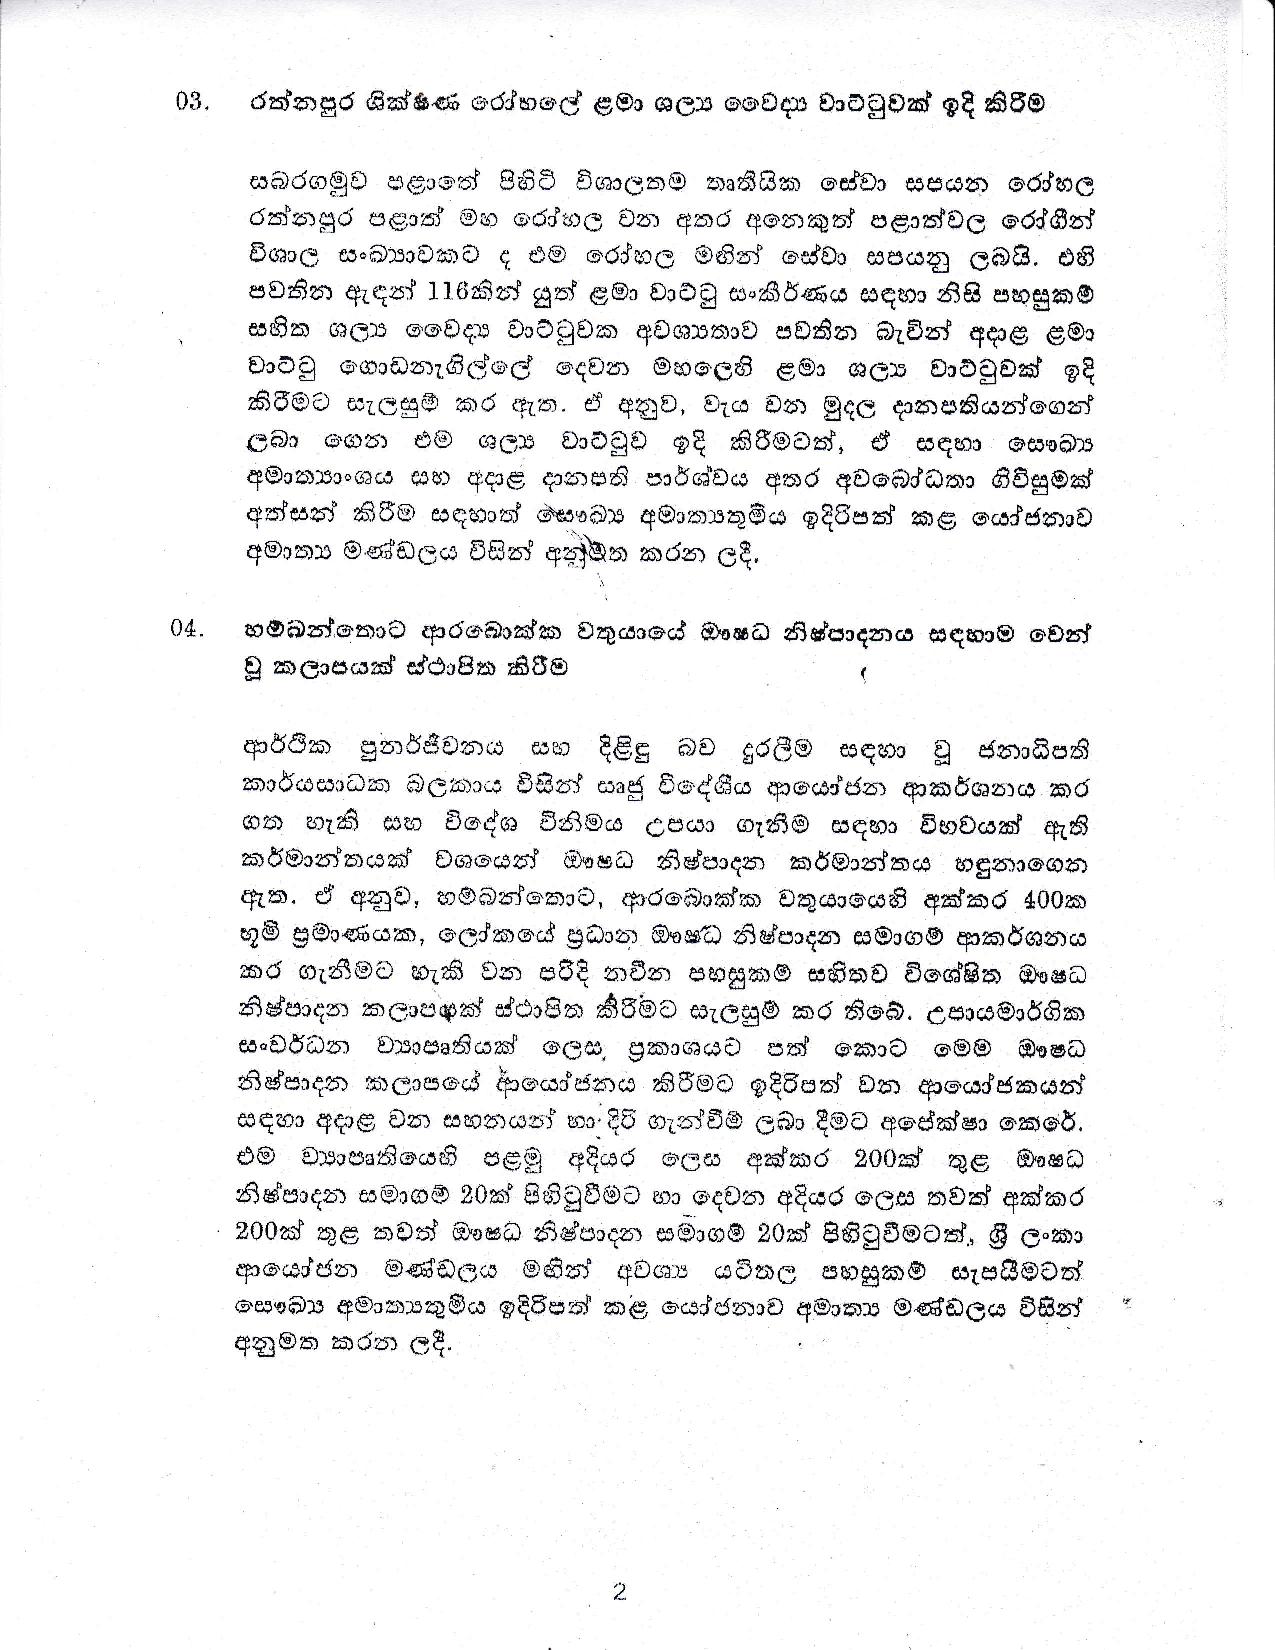 Cabinet Decision on 09.11.2020 page 002